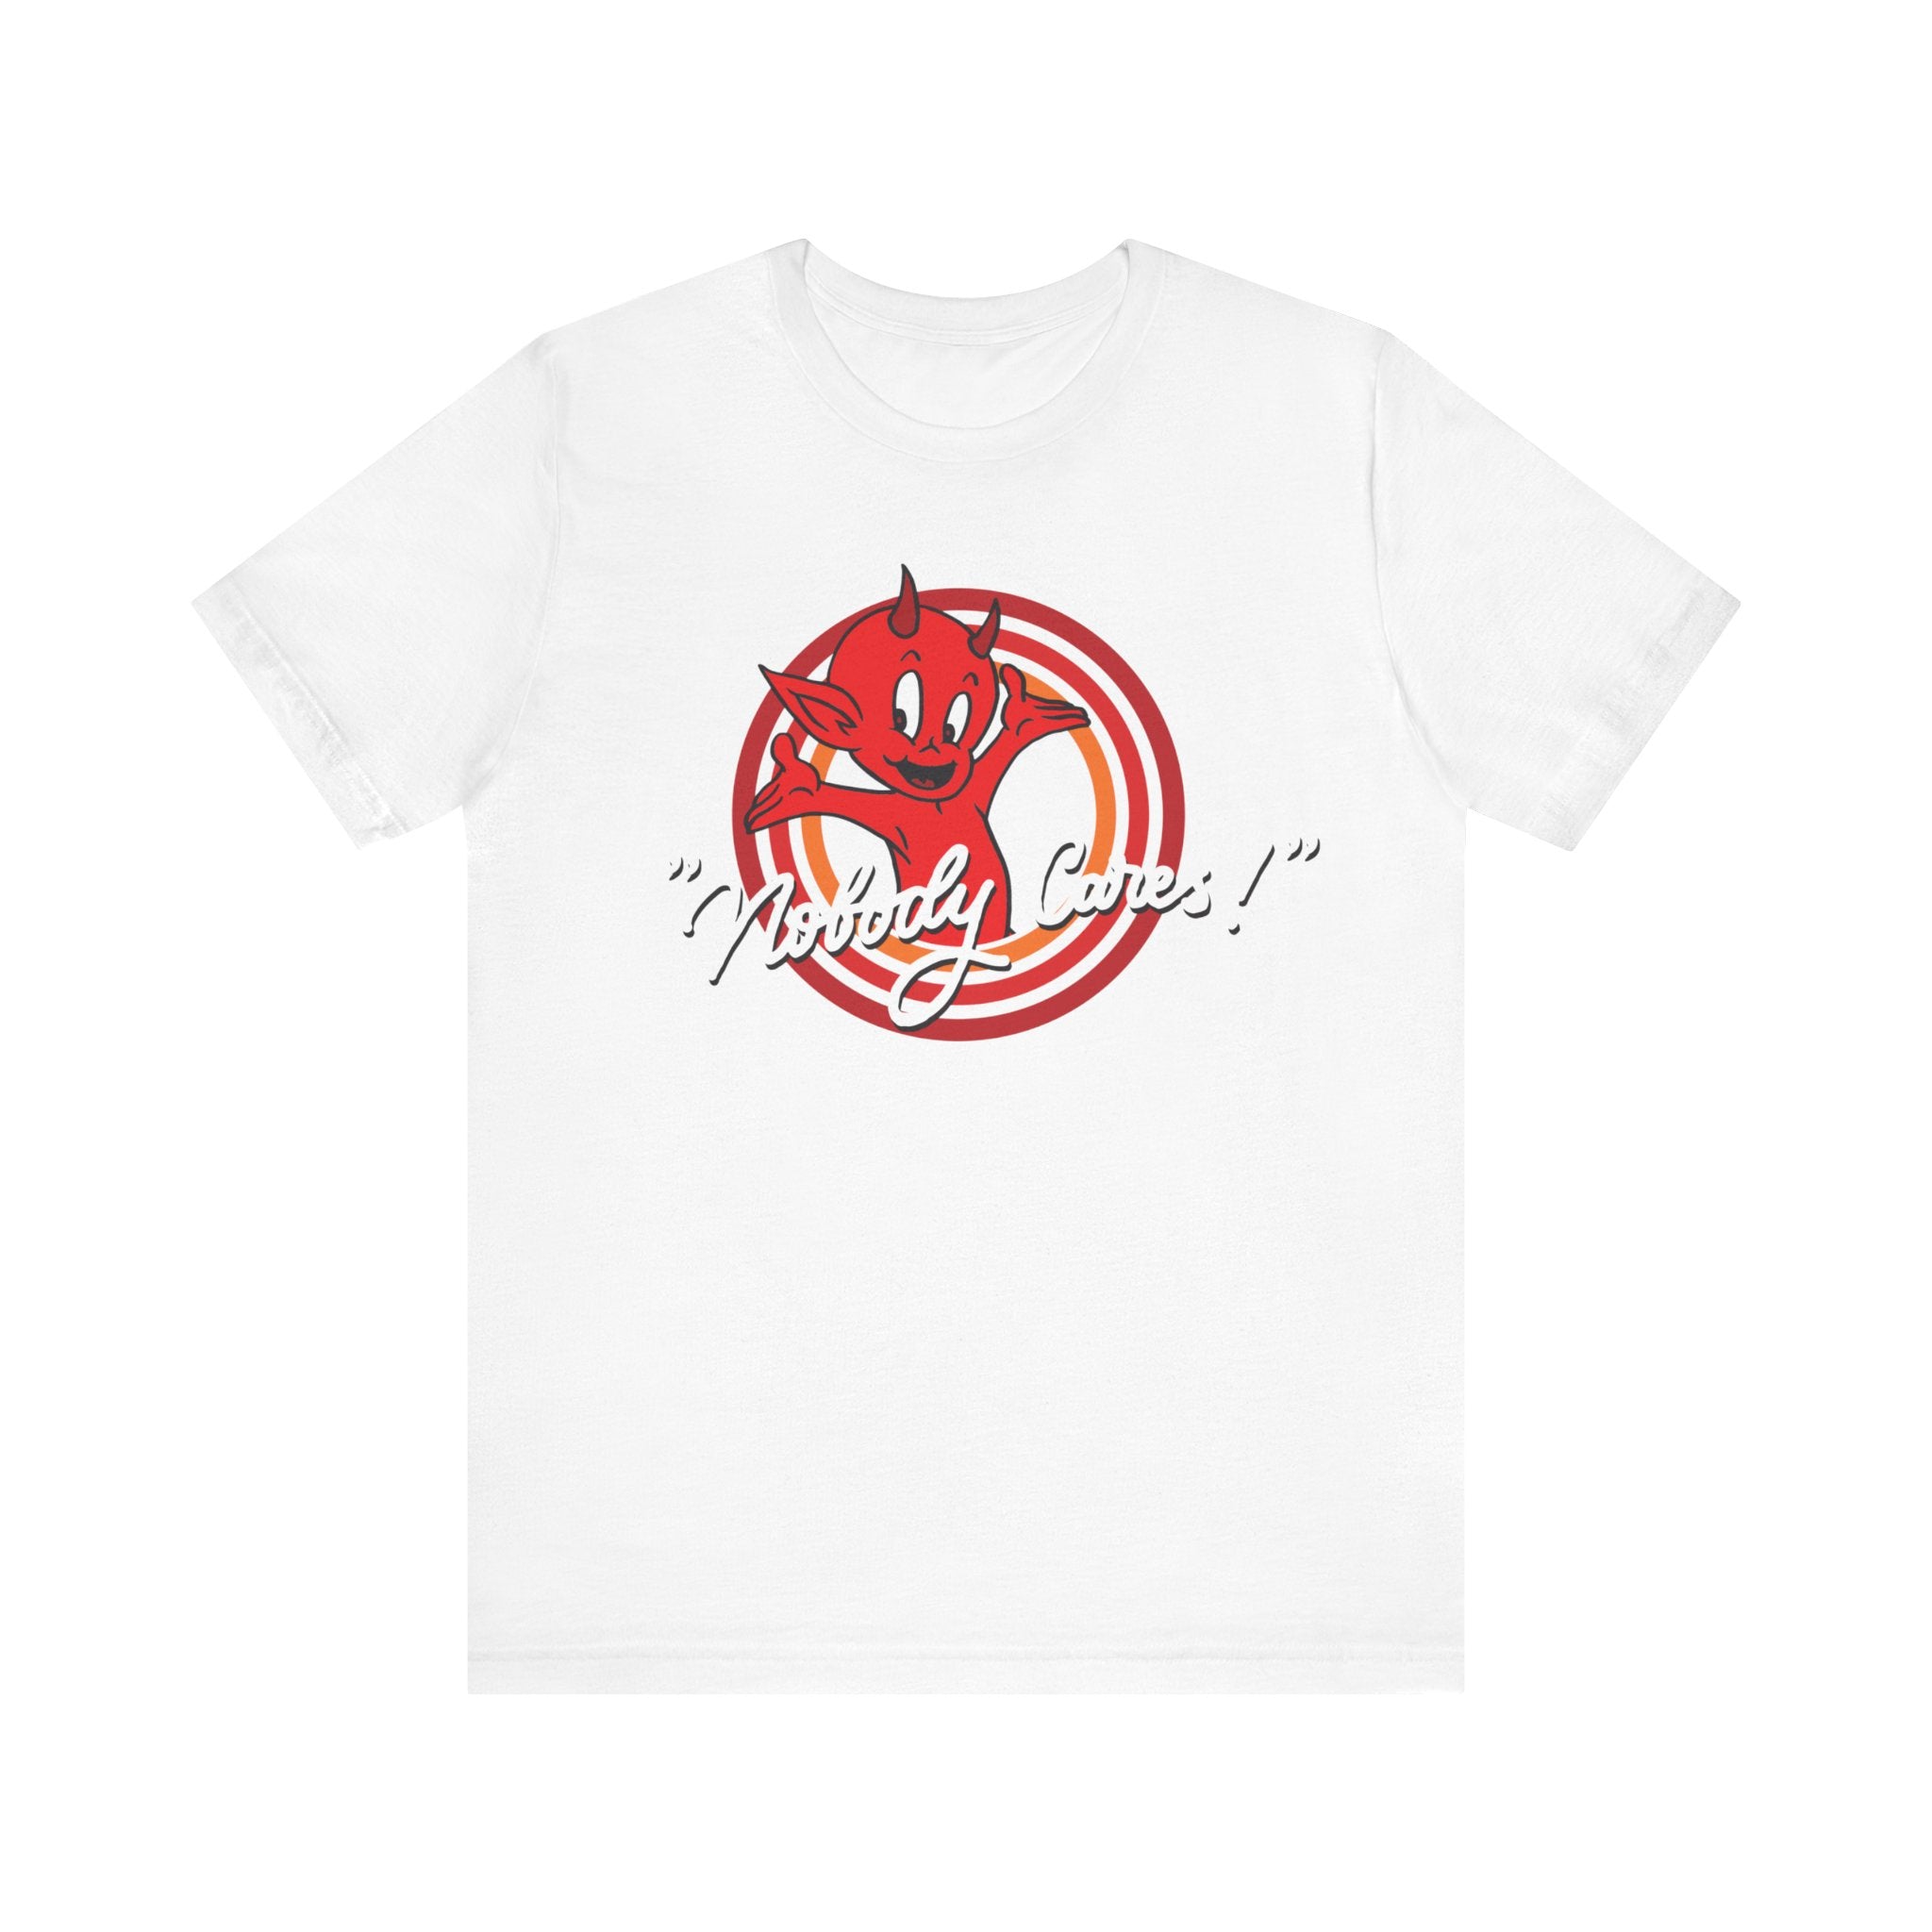 Nobody Cares t-shirt made of soft cotton, featuring a graphic of a red devil inside a swirling candy cane frame, accompanied by the text "wickedly cute!" in playful script.